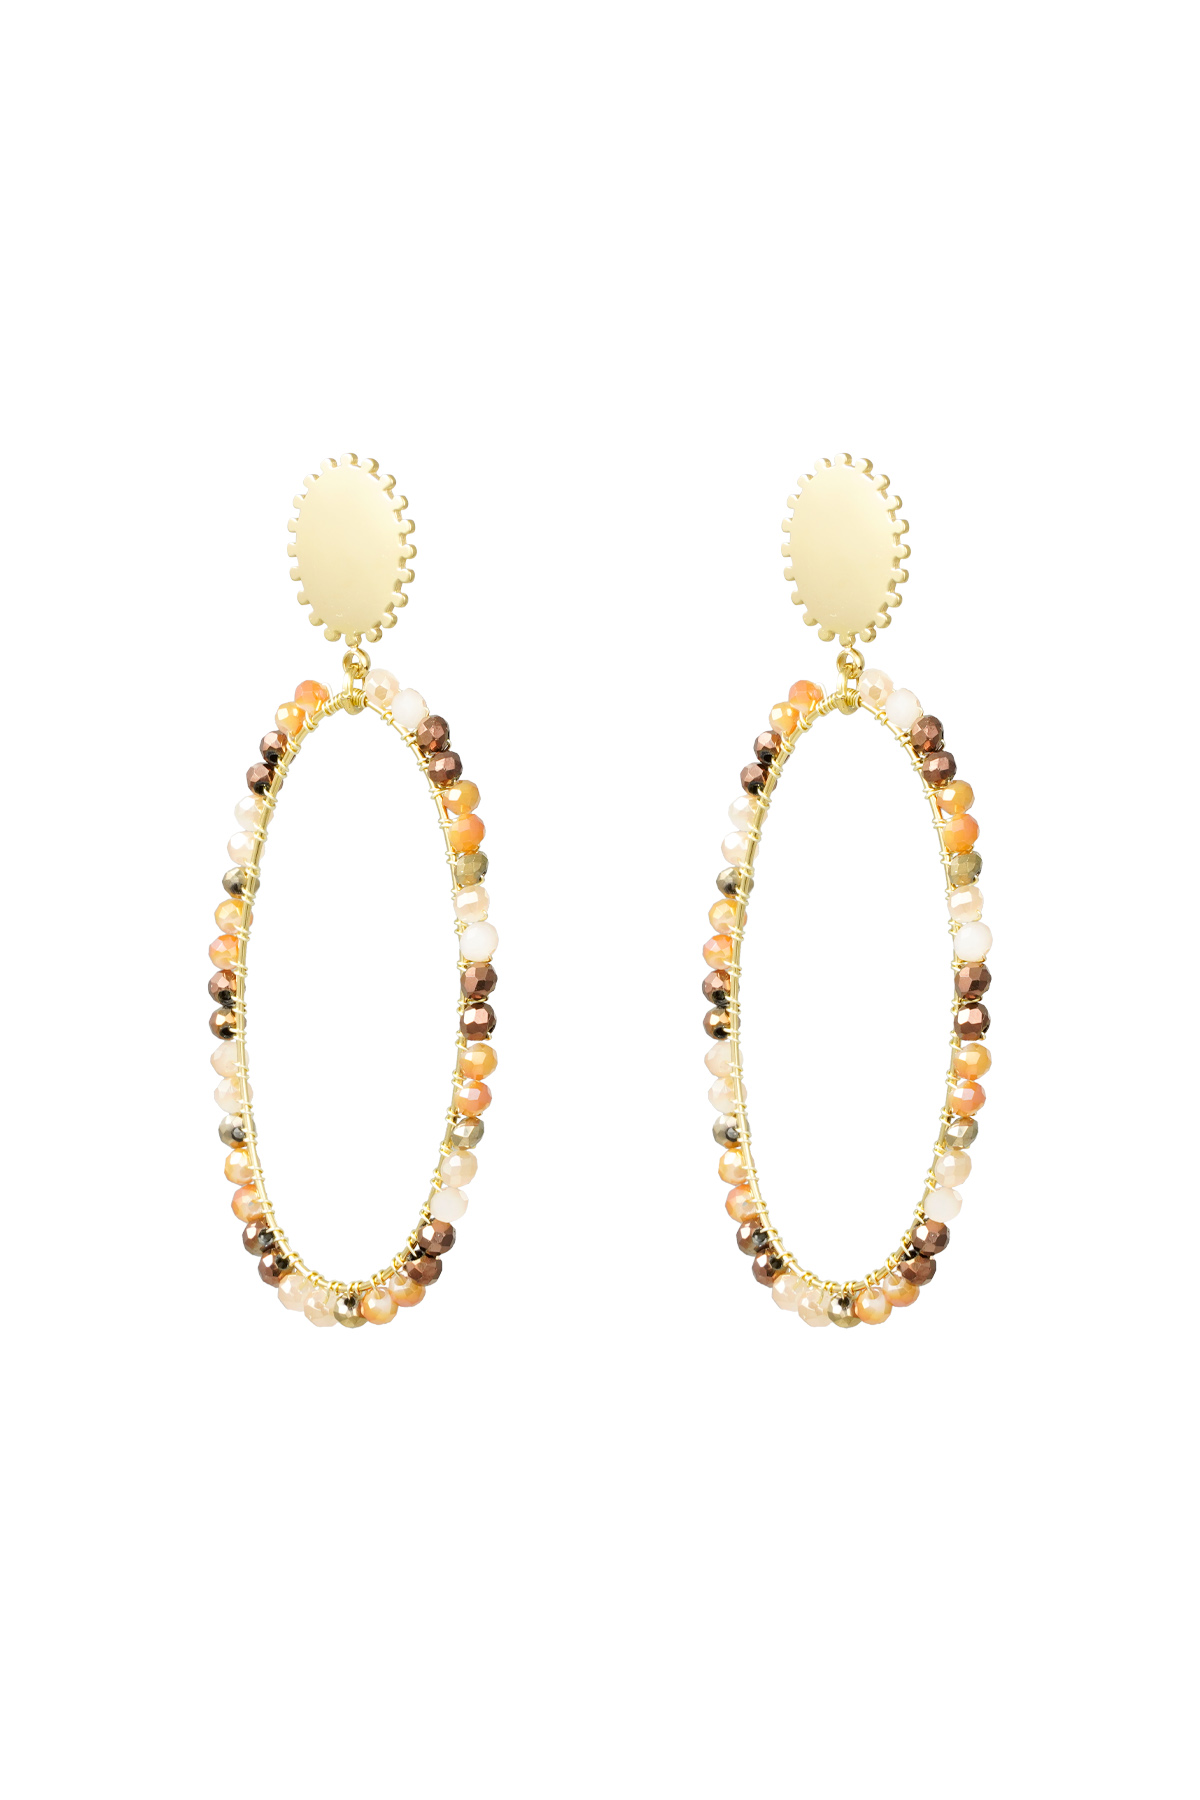 Elongated earrings with beads - gold/beige h5 